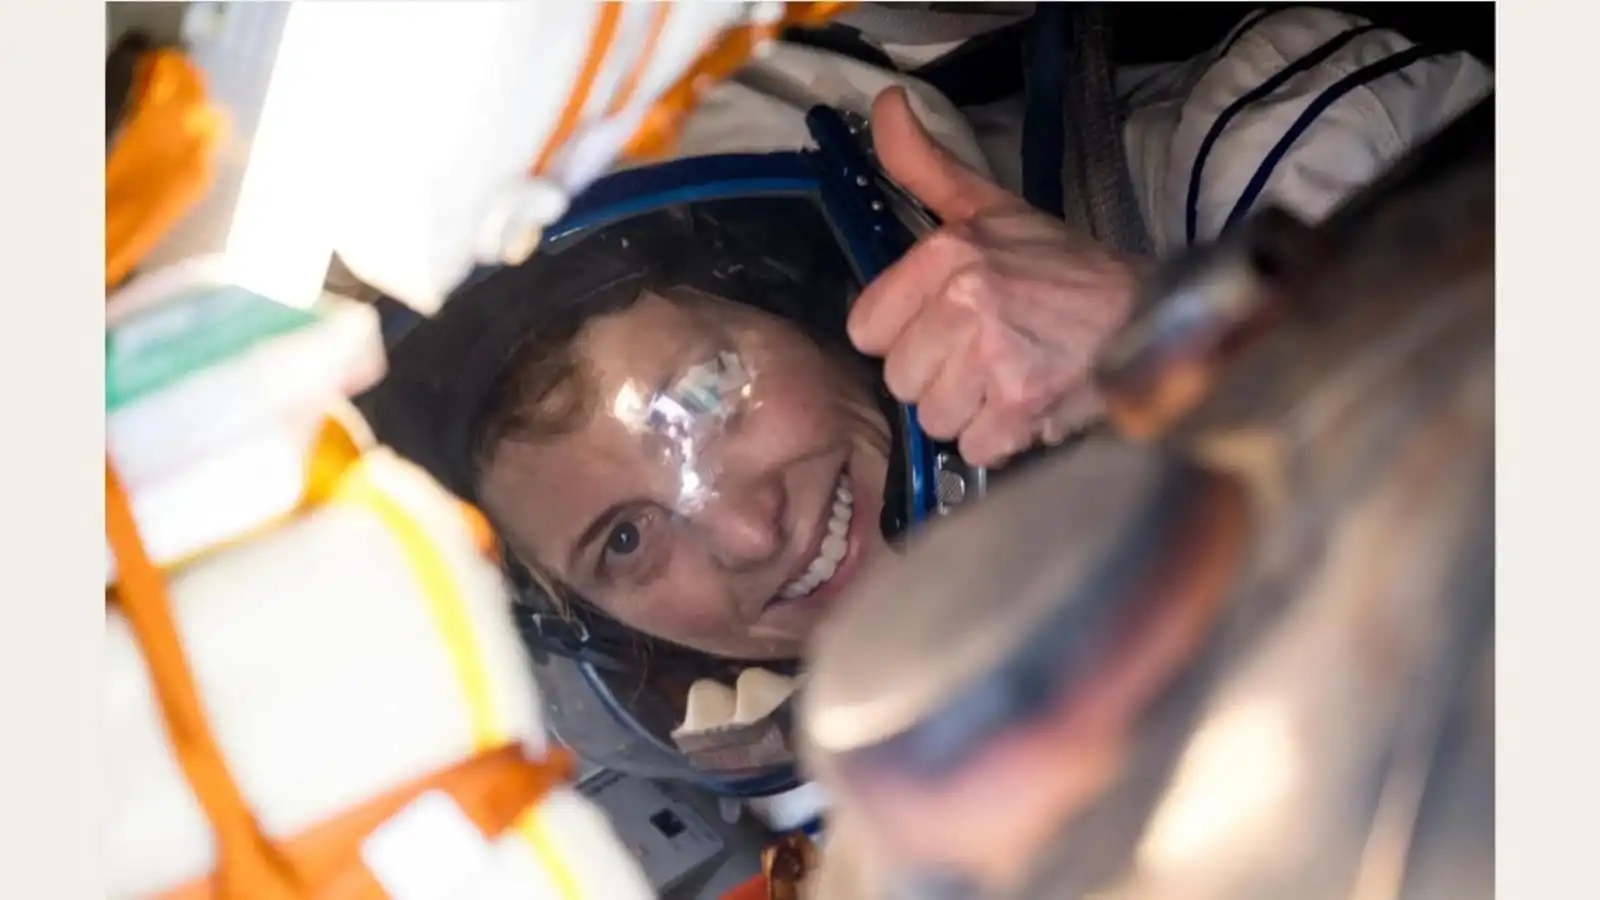 NASA Astronaut Loral O'Hara crew safely land Earth 6-months space station mission